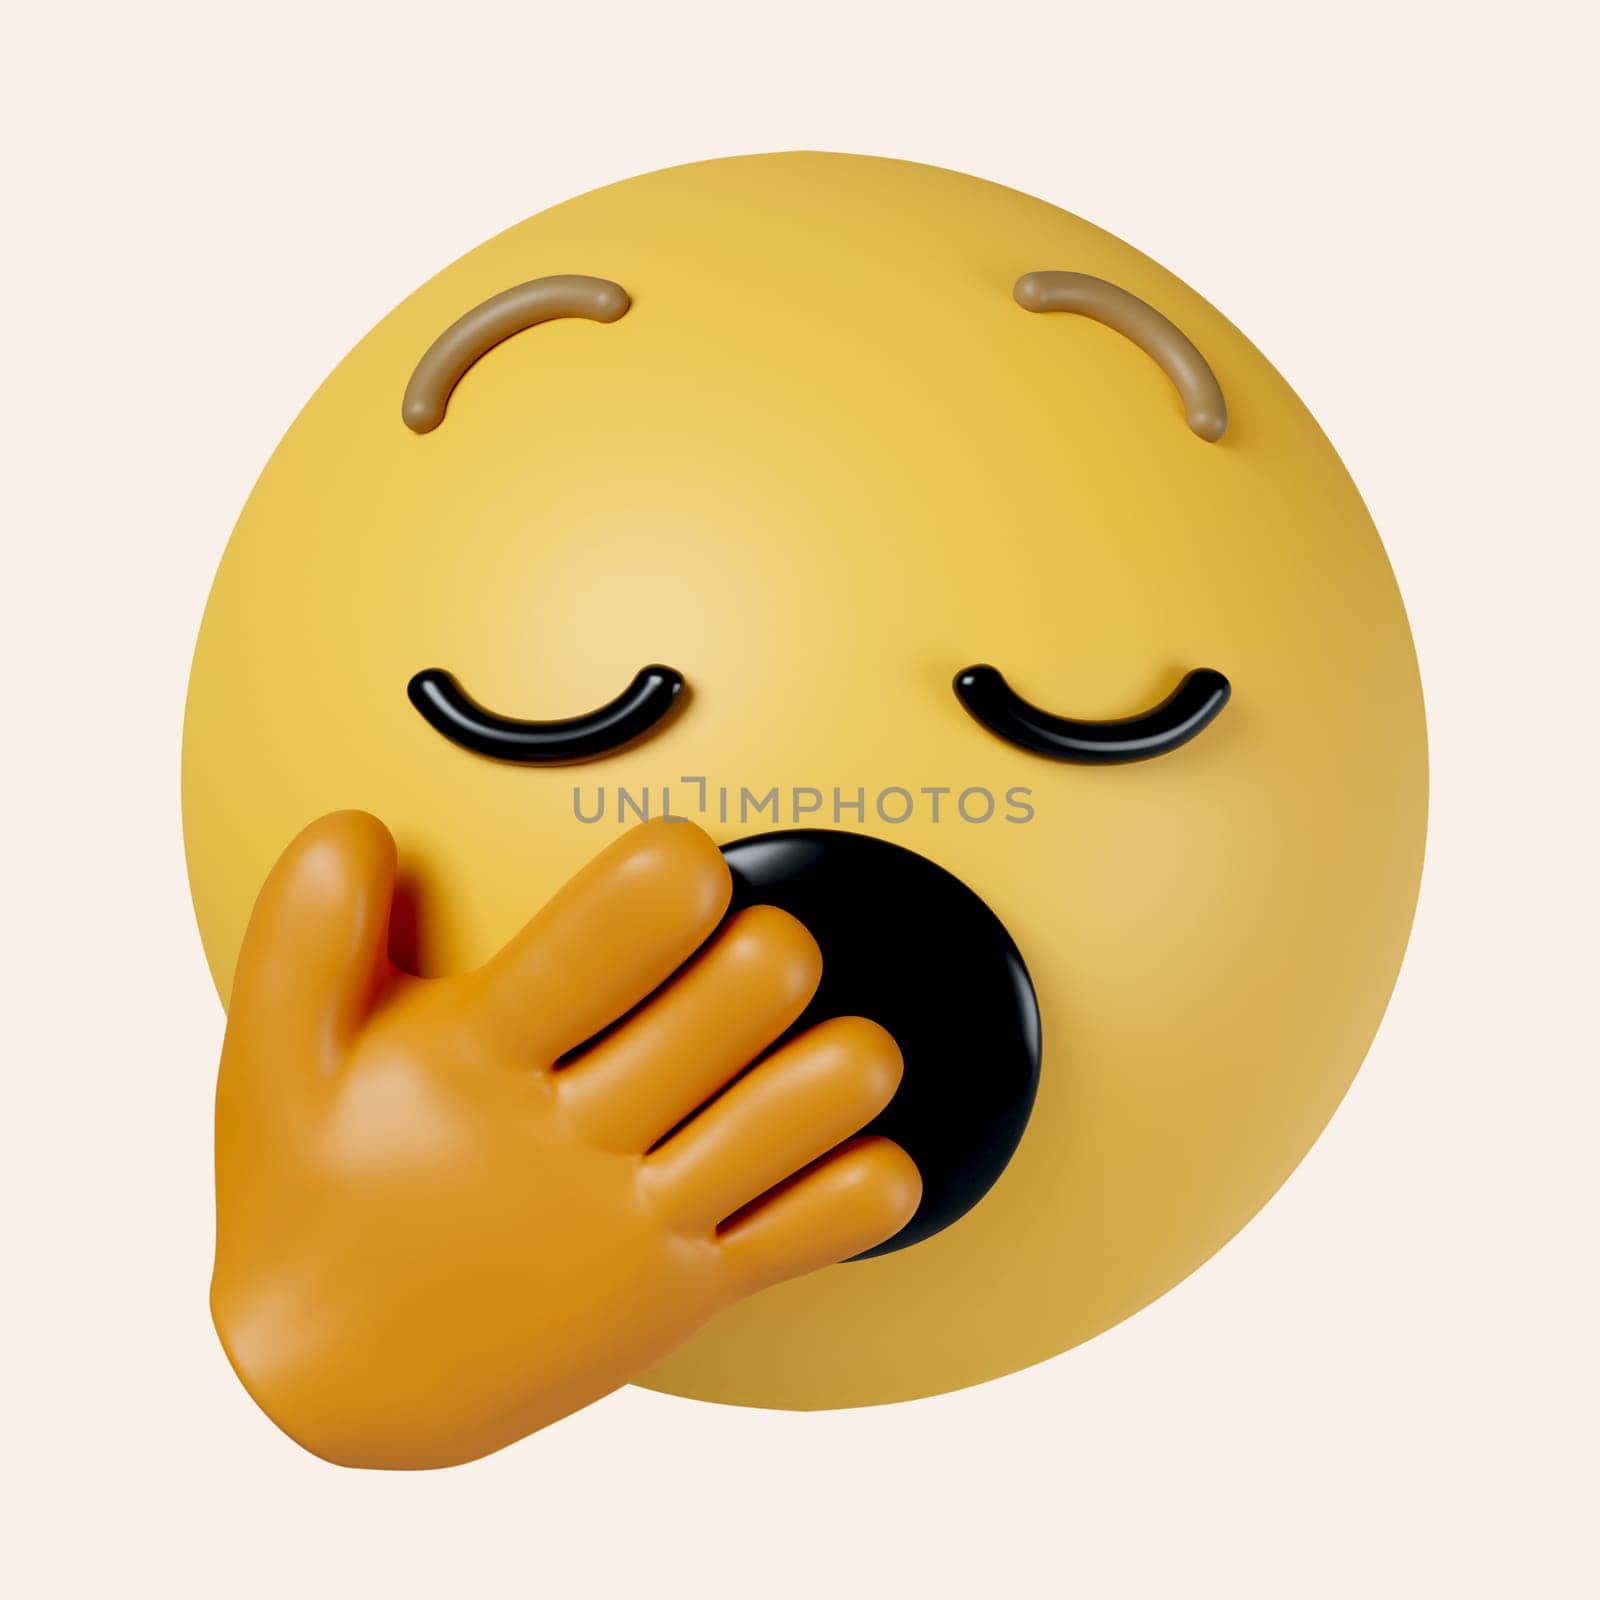 3d Yawning face emoji. emoticon with eyes closed and mouth wide open covered by a hand. icon isolated on gray background. 3d rendering illustration. Clipping path..